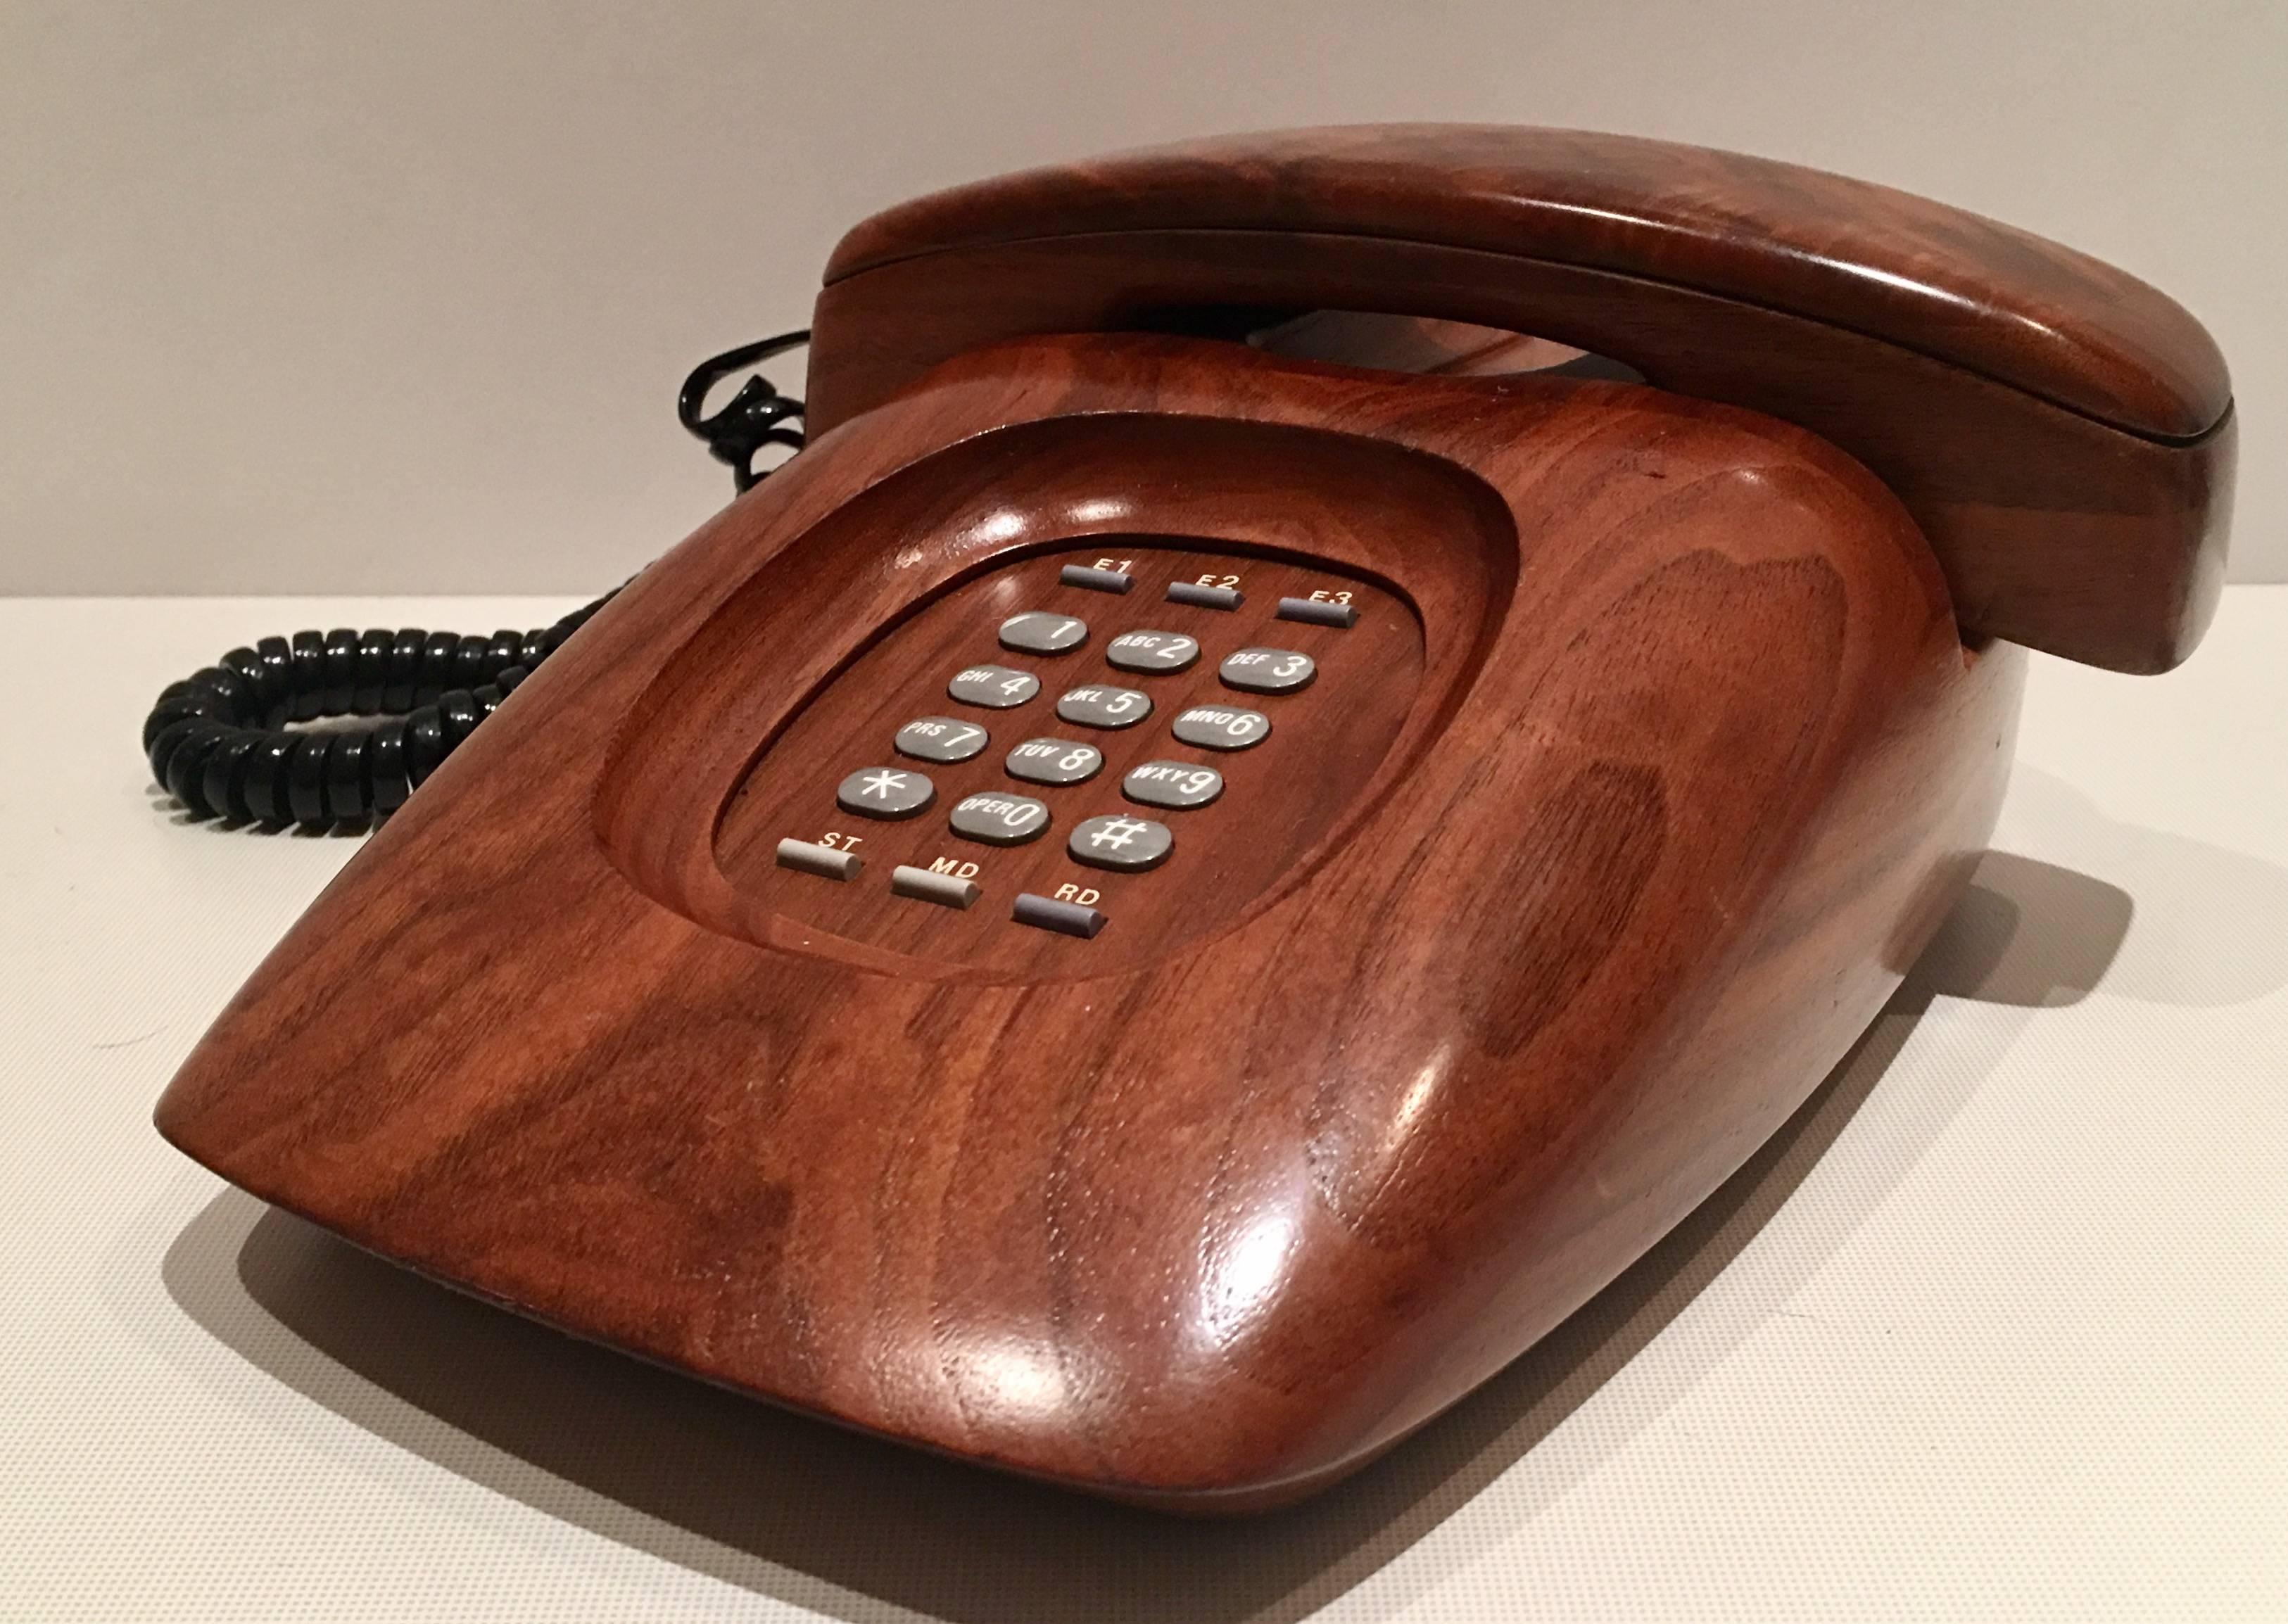 Executive walnut wood Mid-Century Modern American push button telephone.
Fully tested and in operating condition. Made by WCC Wood Communications Co. in Seattle Washington, Model No. E100, original manufacturer information on the underside.